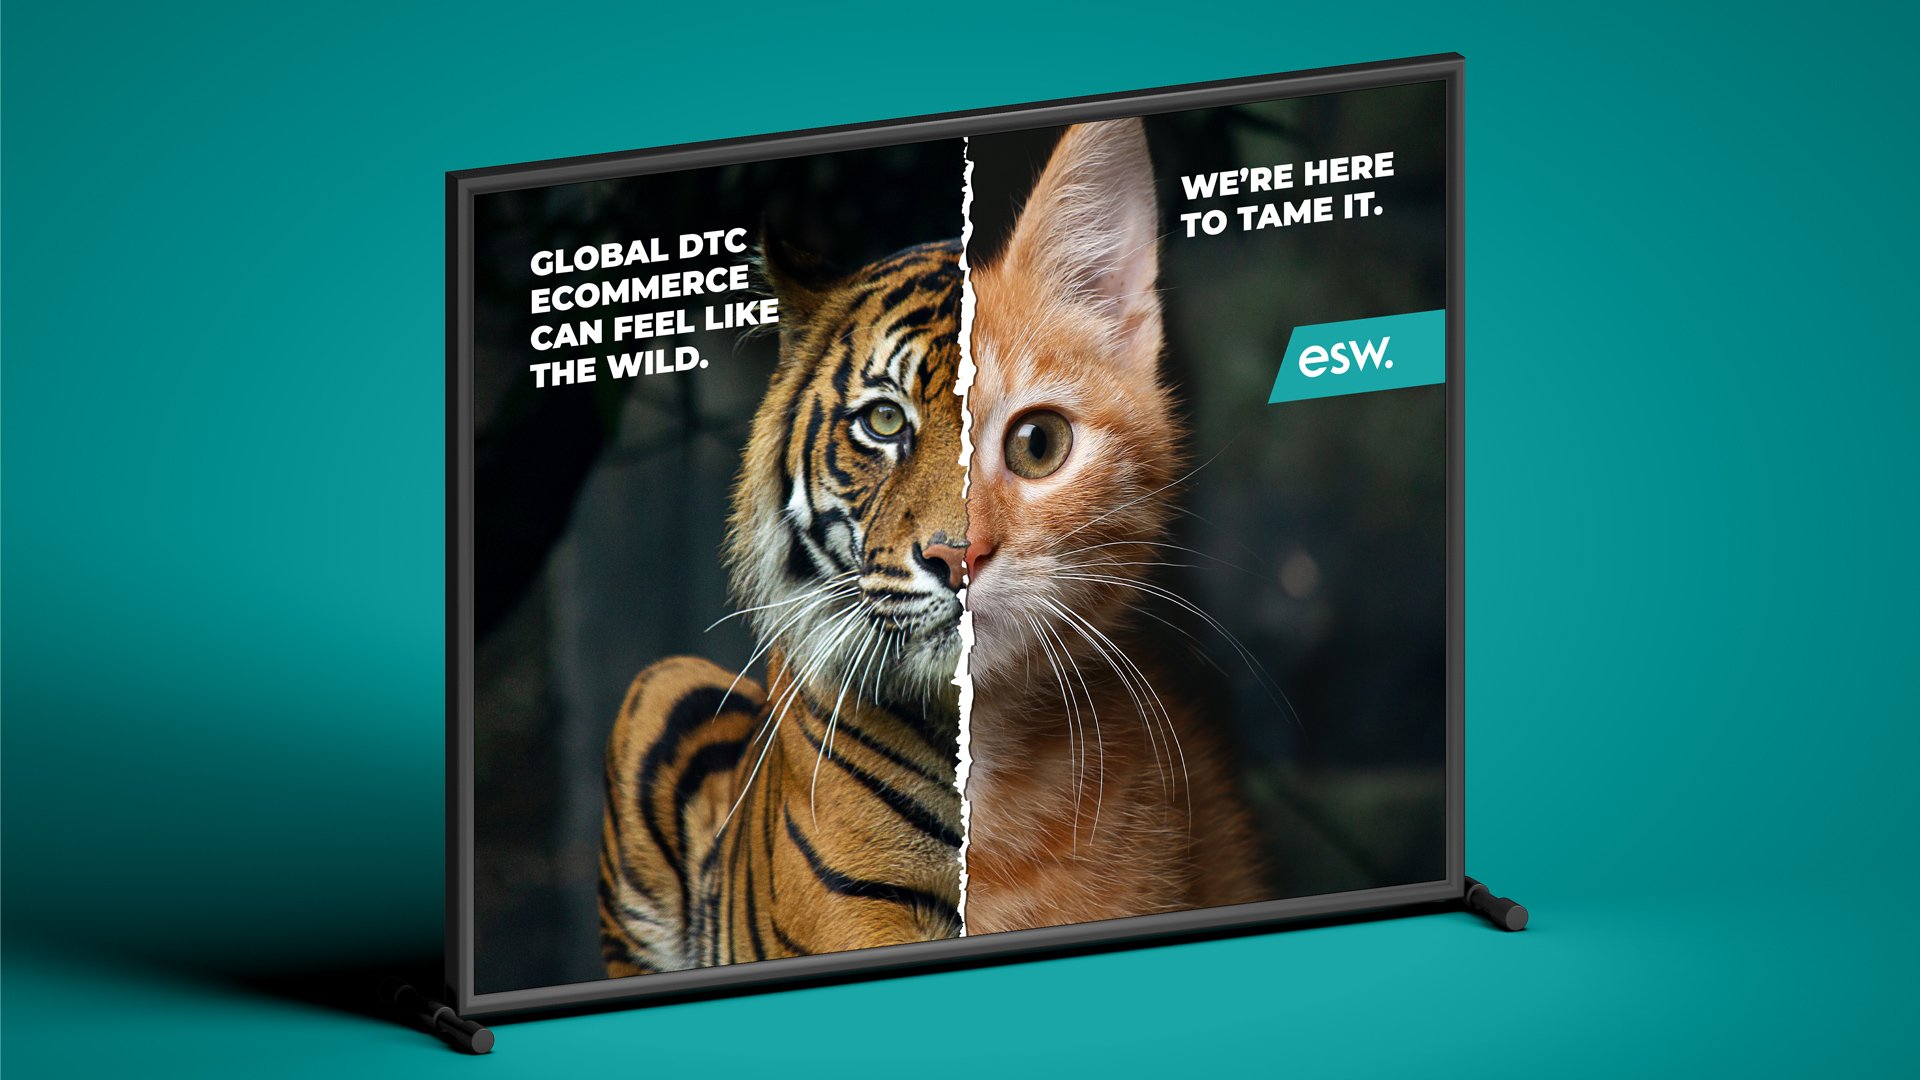 A television screen featuring the tiger/kitten ad sits against a teal background.